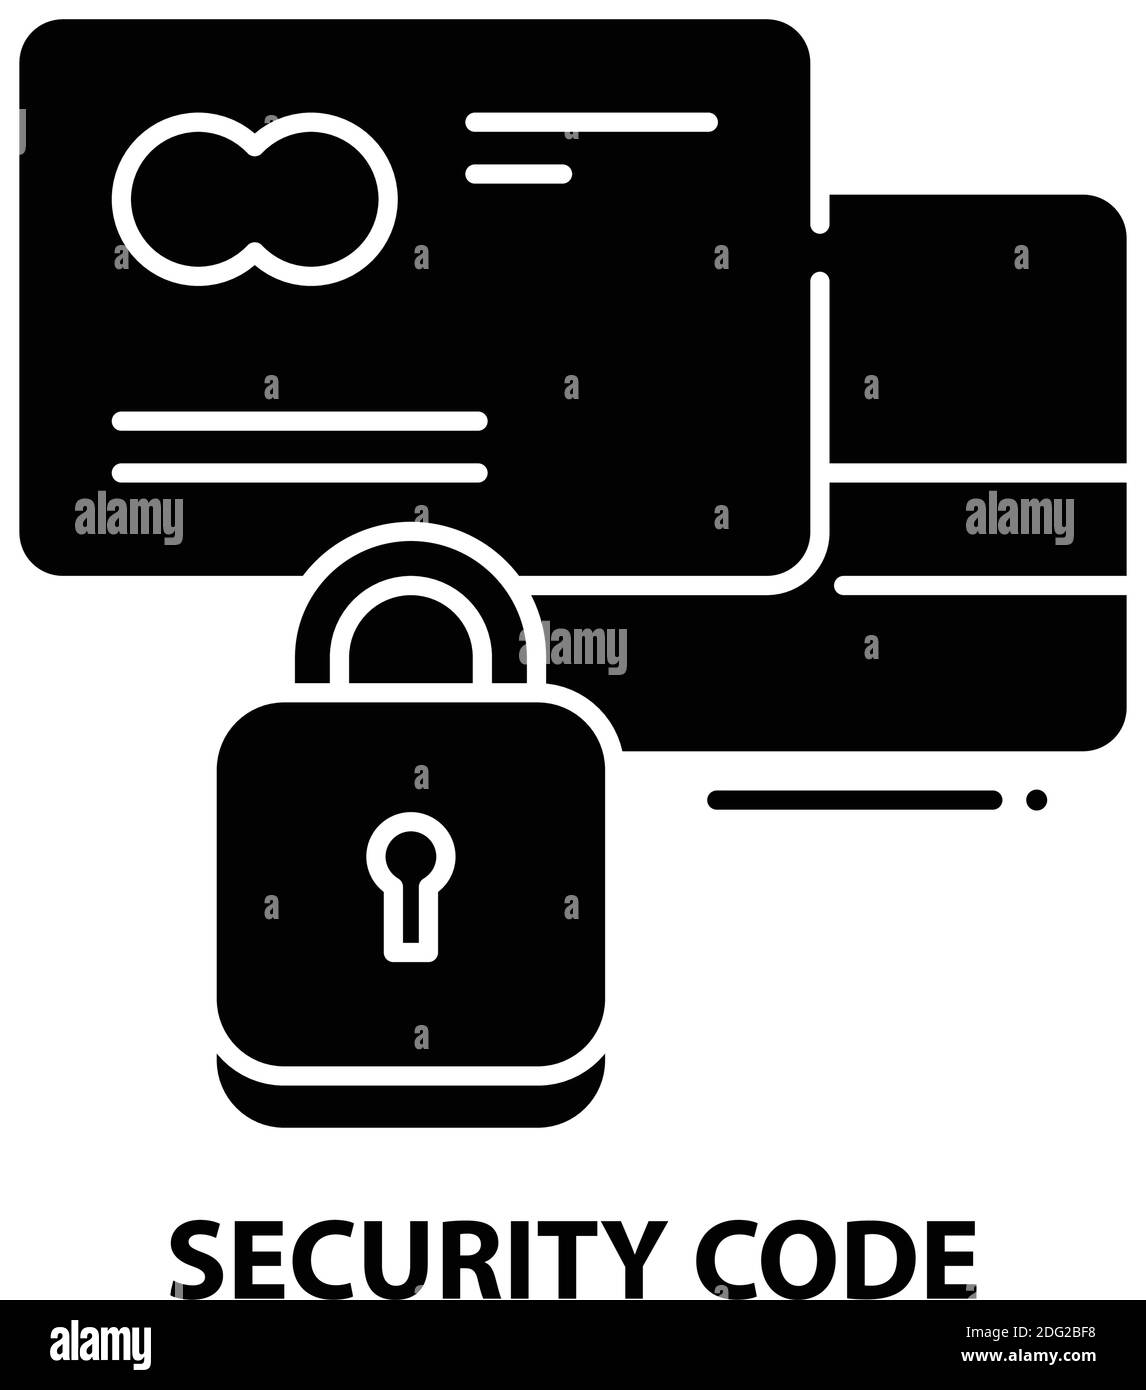 security code icon, black vector sign with editable strokes, concept illustration Stock Vector